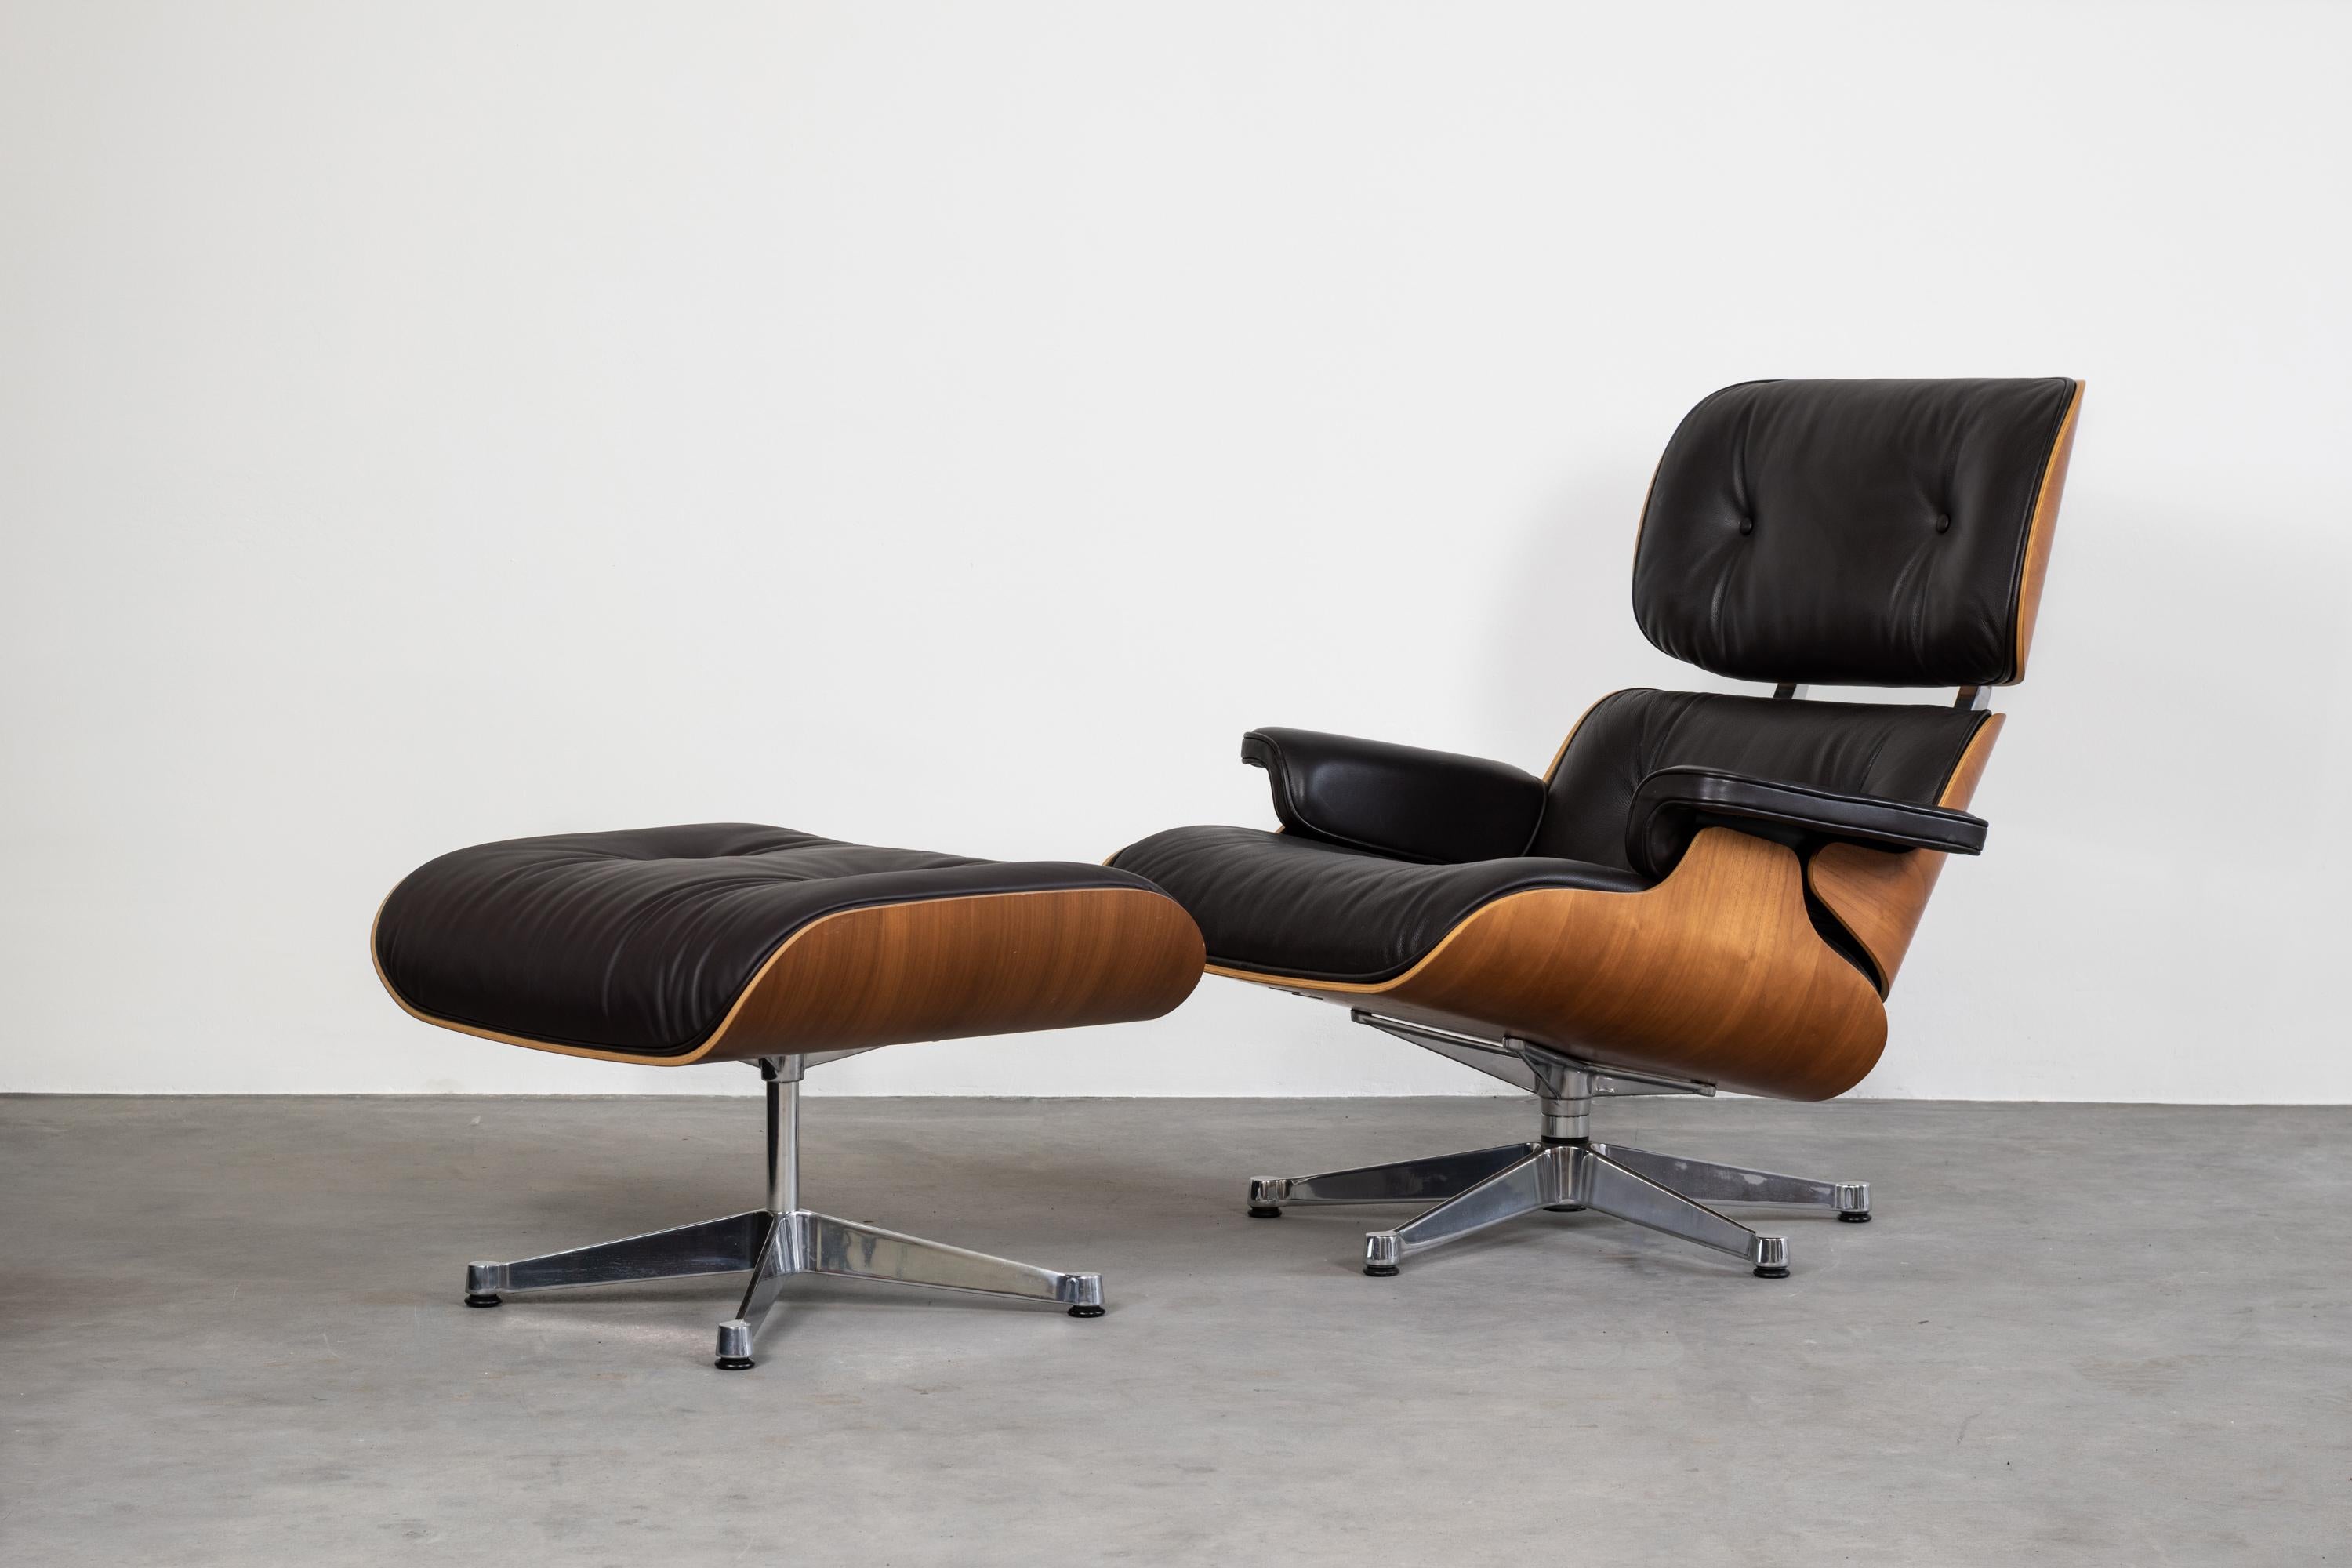 Iconic lounge chair 670 and ottoman 671 designed by Charles & Ray Eames in 1956 and produced by Vitra.
Seat and back 'shells' in plywood covered with black leather and bases in die-cast aluminium.
Manufacturer's mark under the seat.
Measurements: